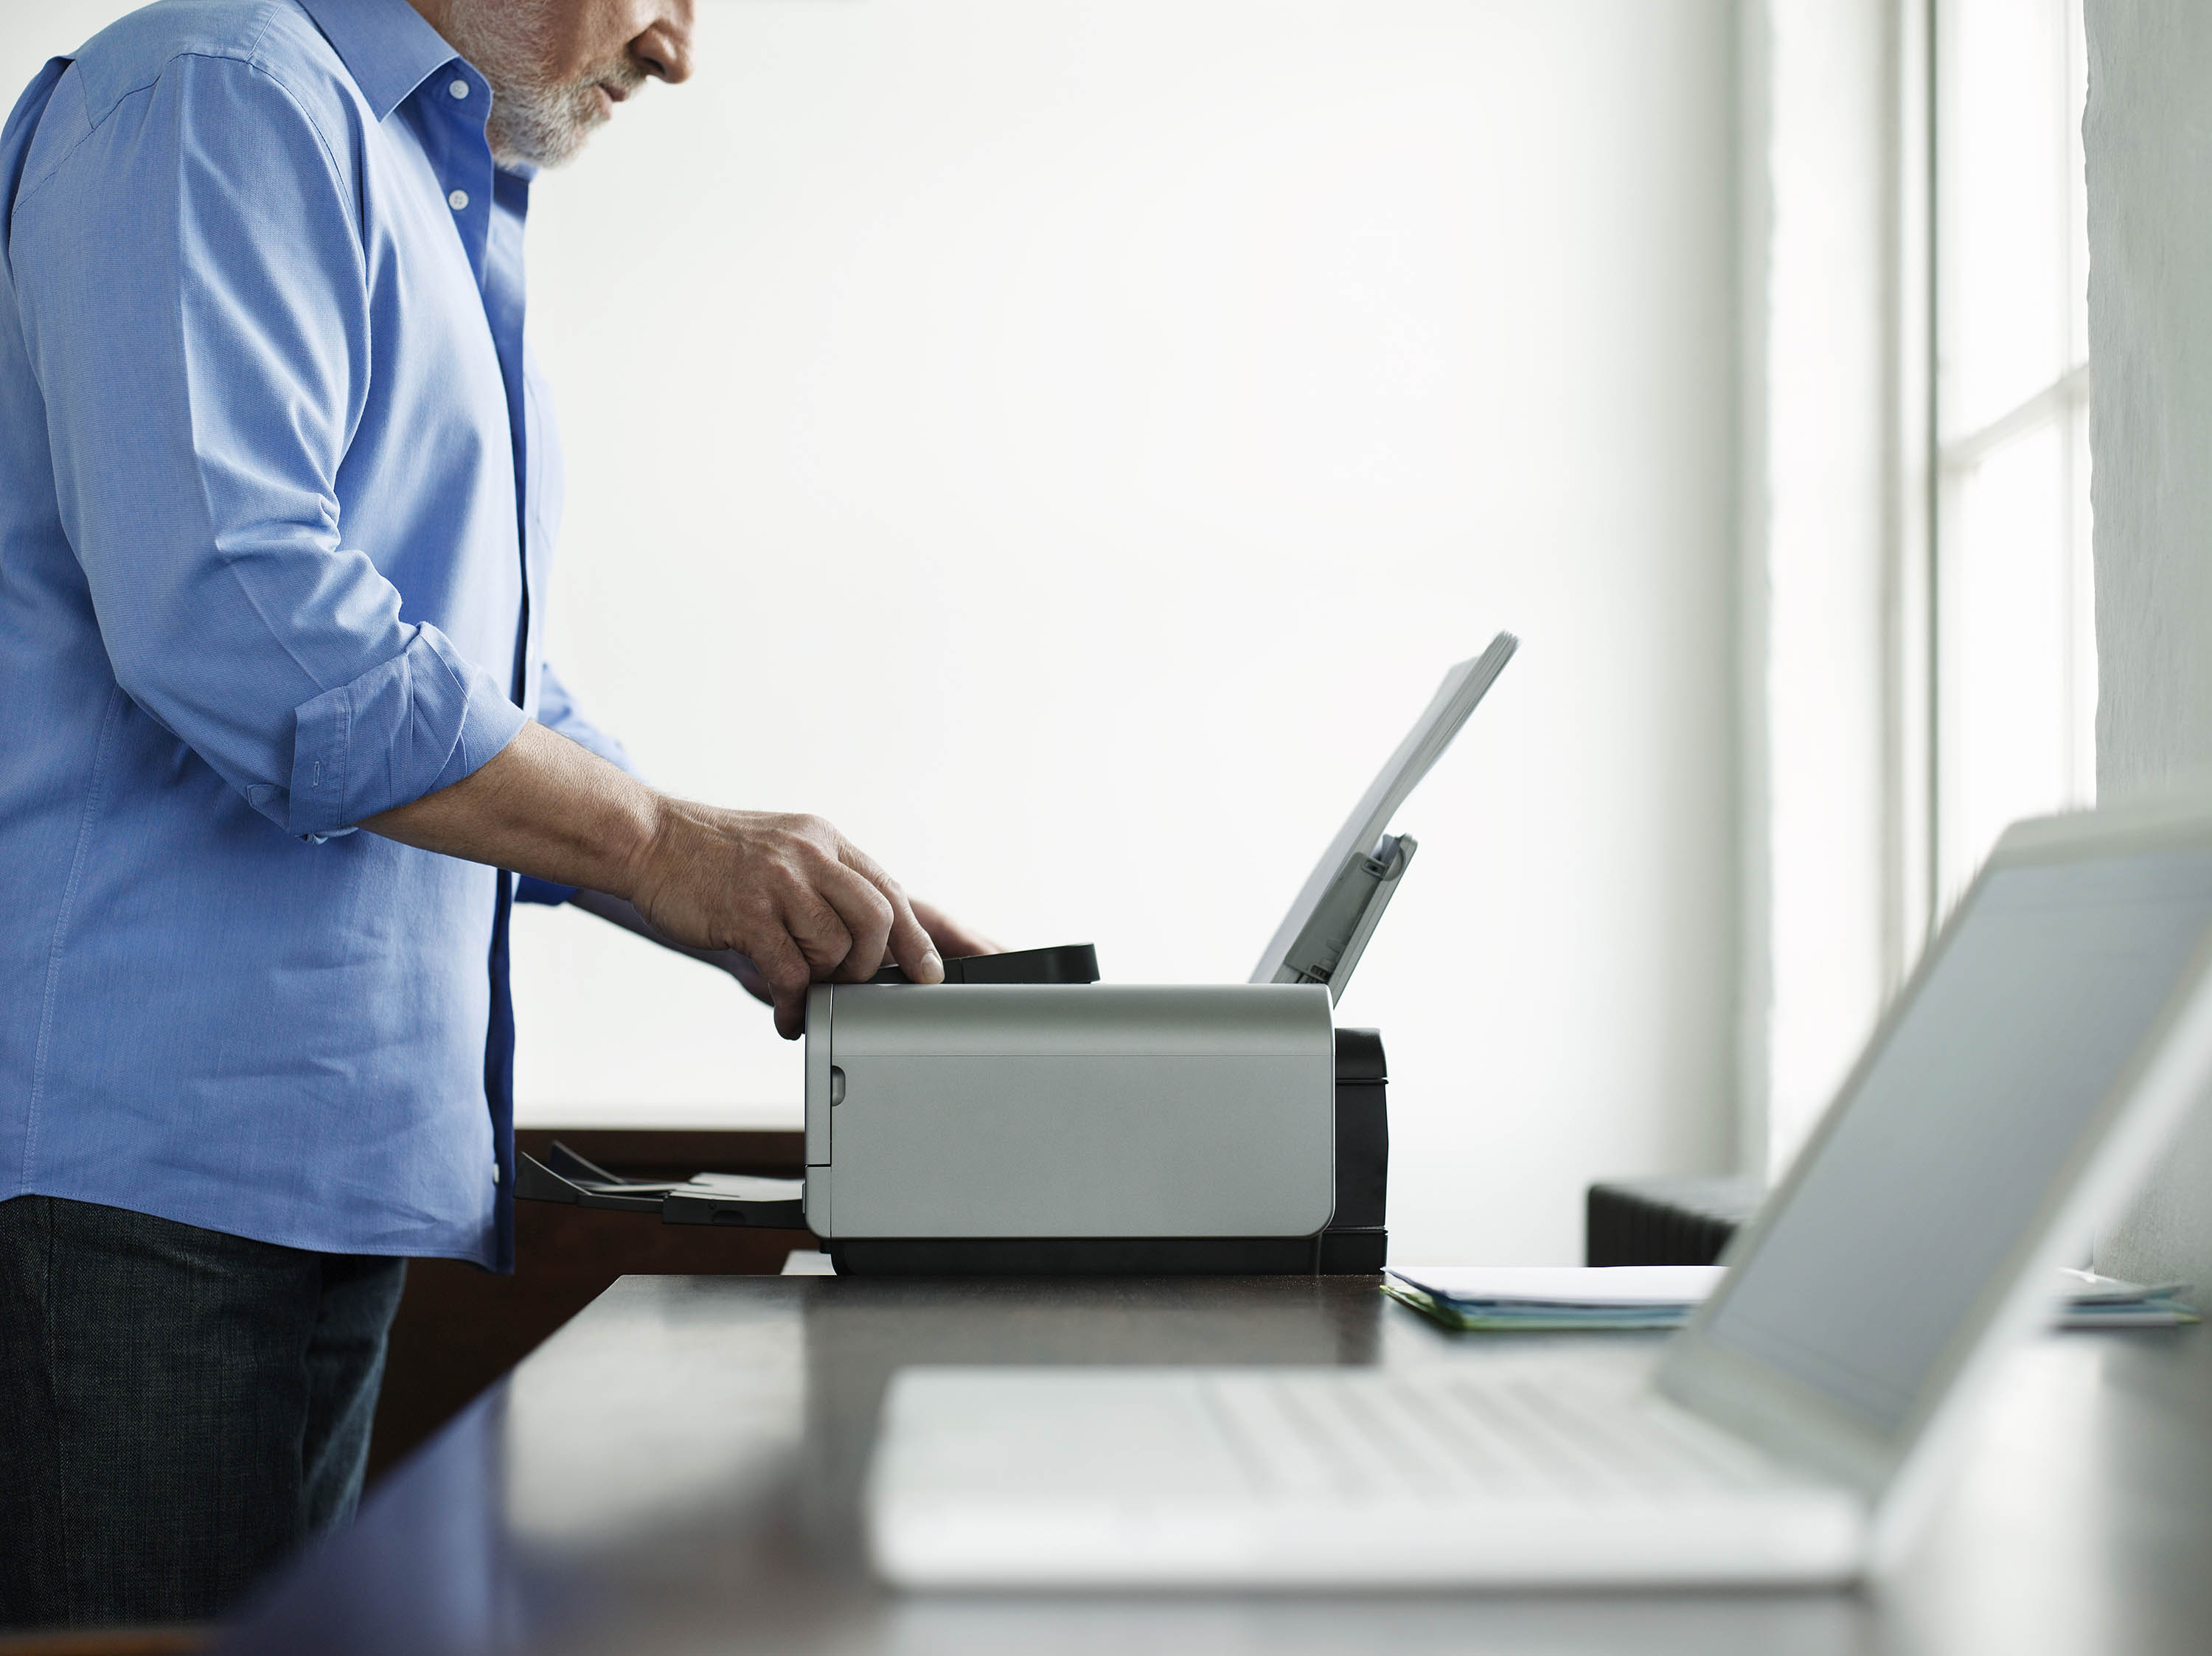 Side view midsection of a mature man using printer at study table in house